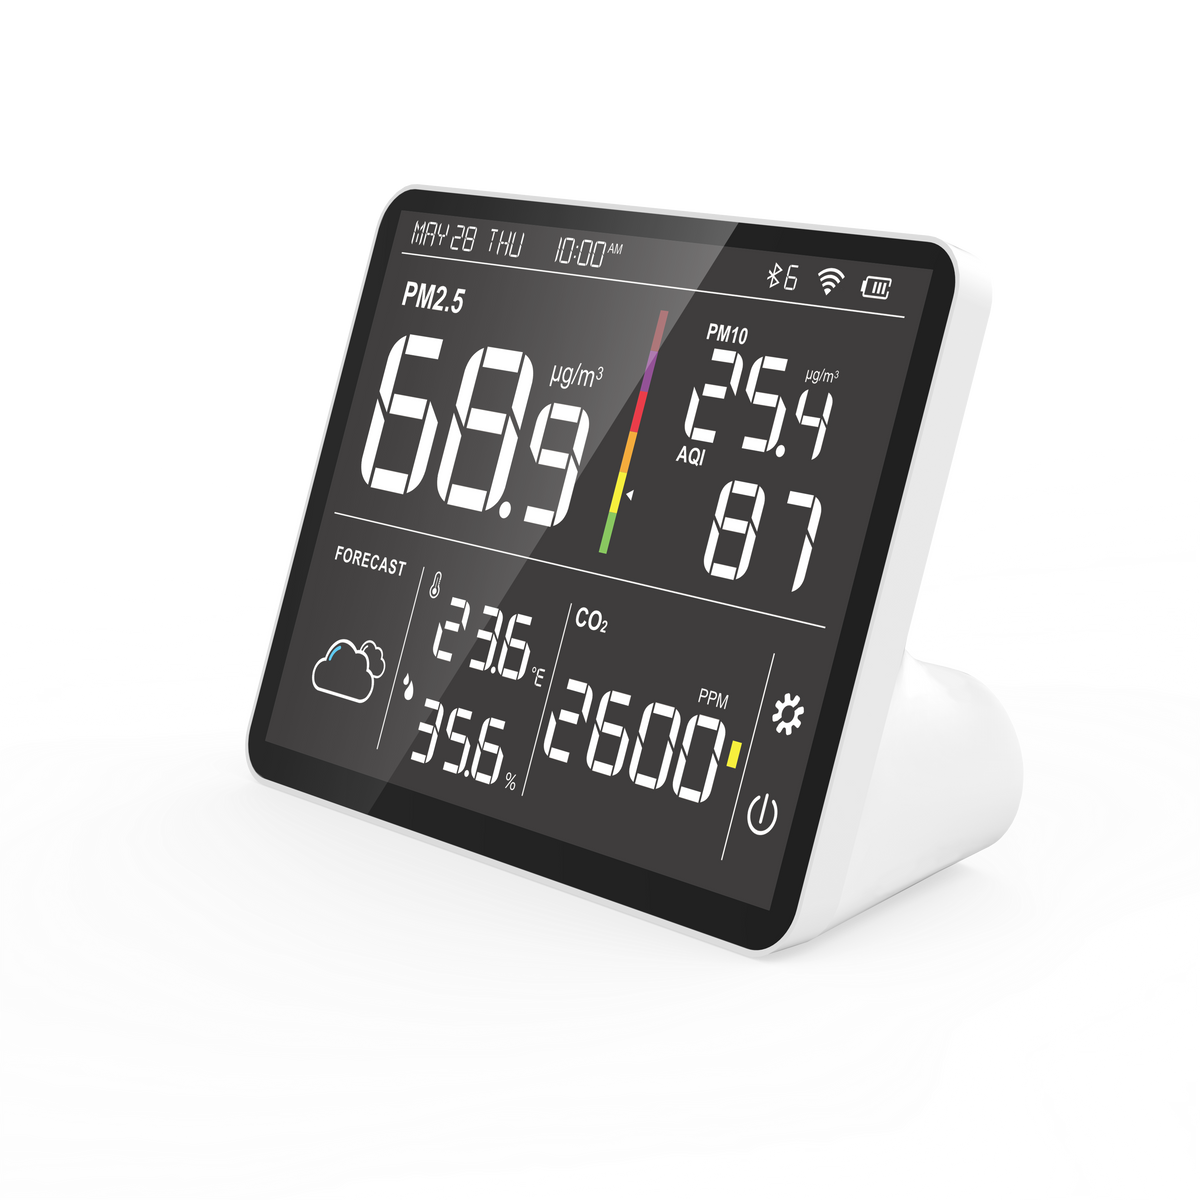 M100 8 in 1 Air Quality Monitor - eucatech Store